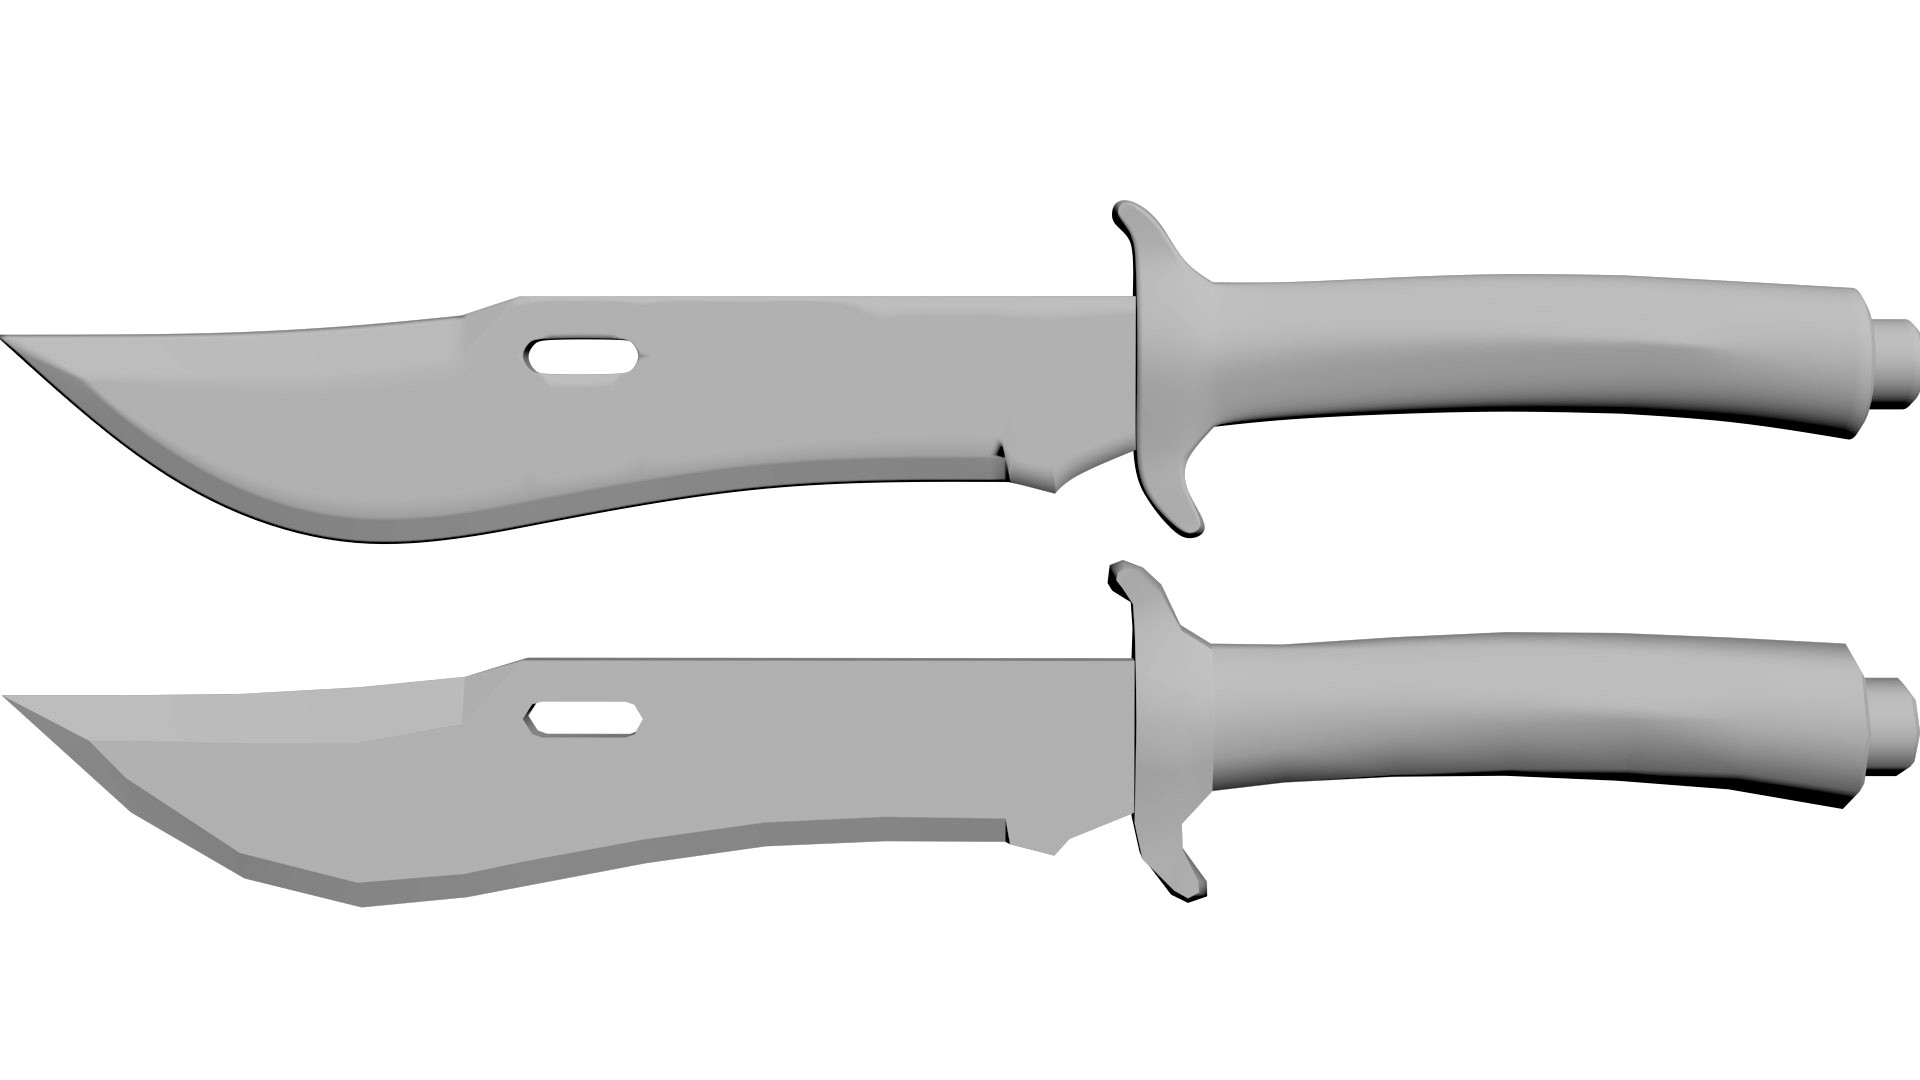 Camp Knife(low and High)